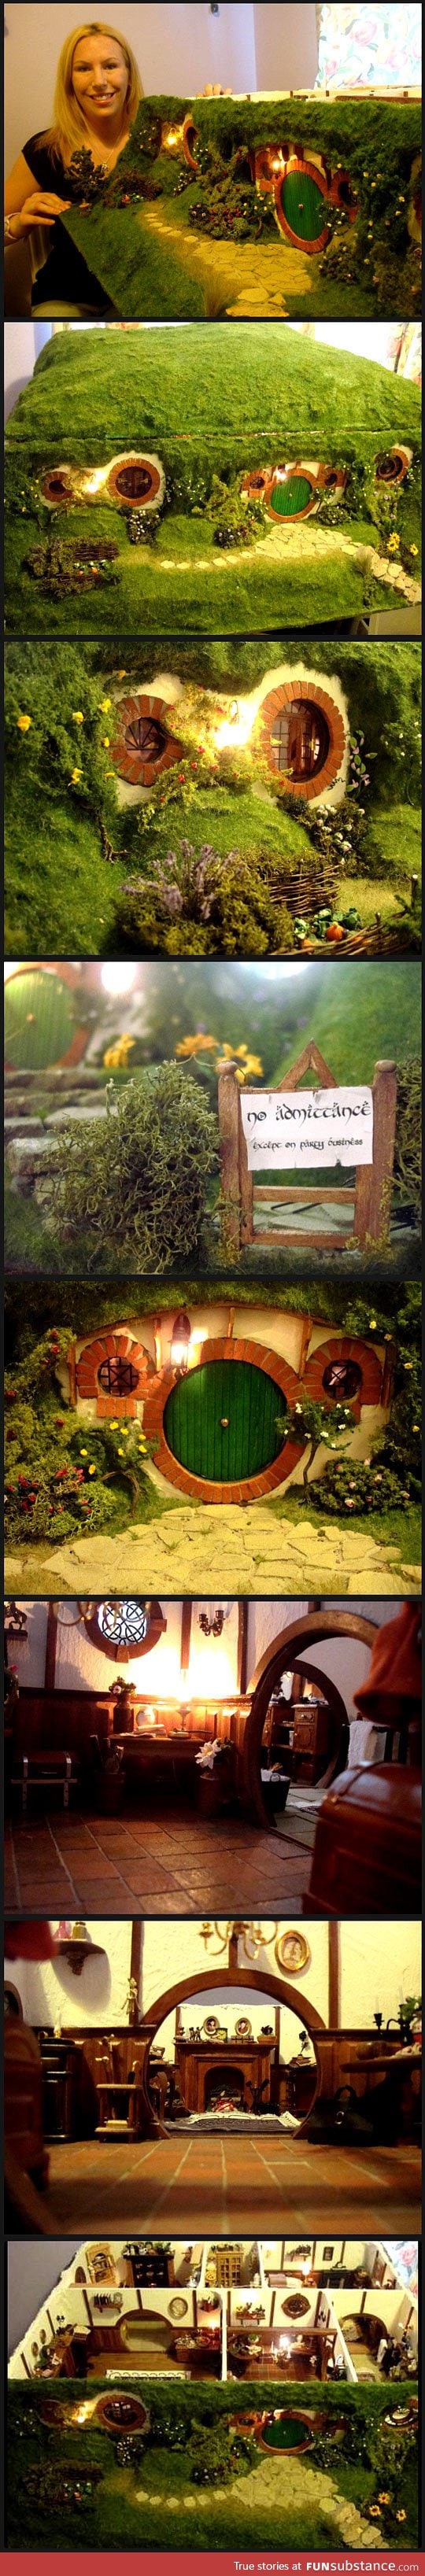 Ever seen a hobbit dollhouse? Now you have